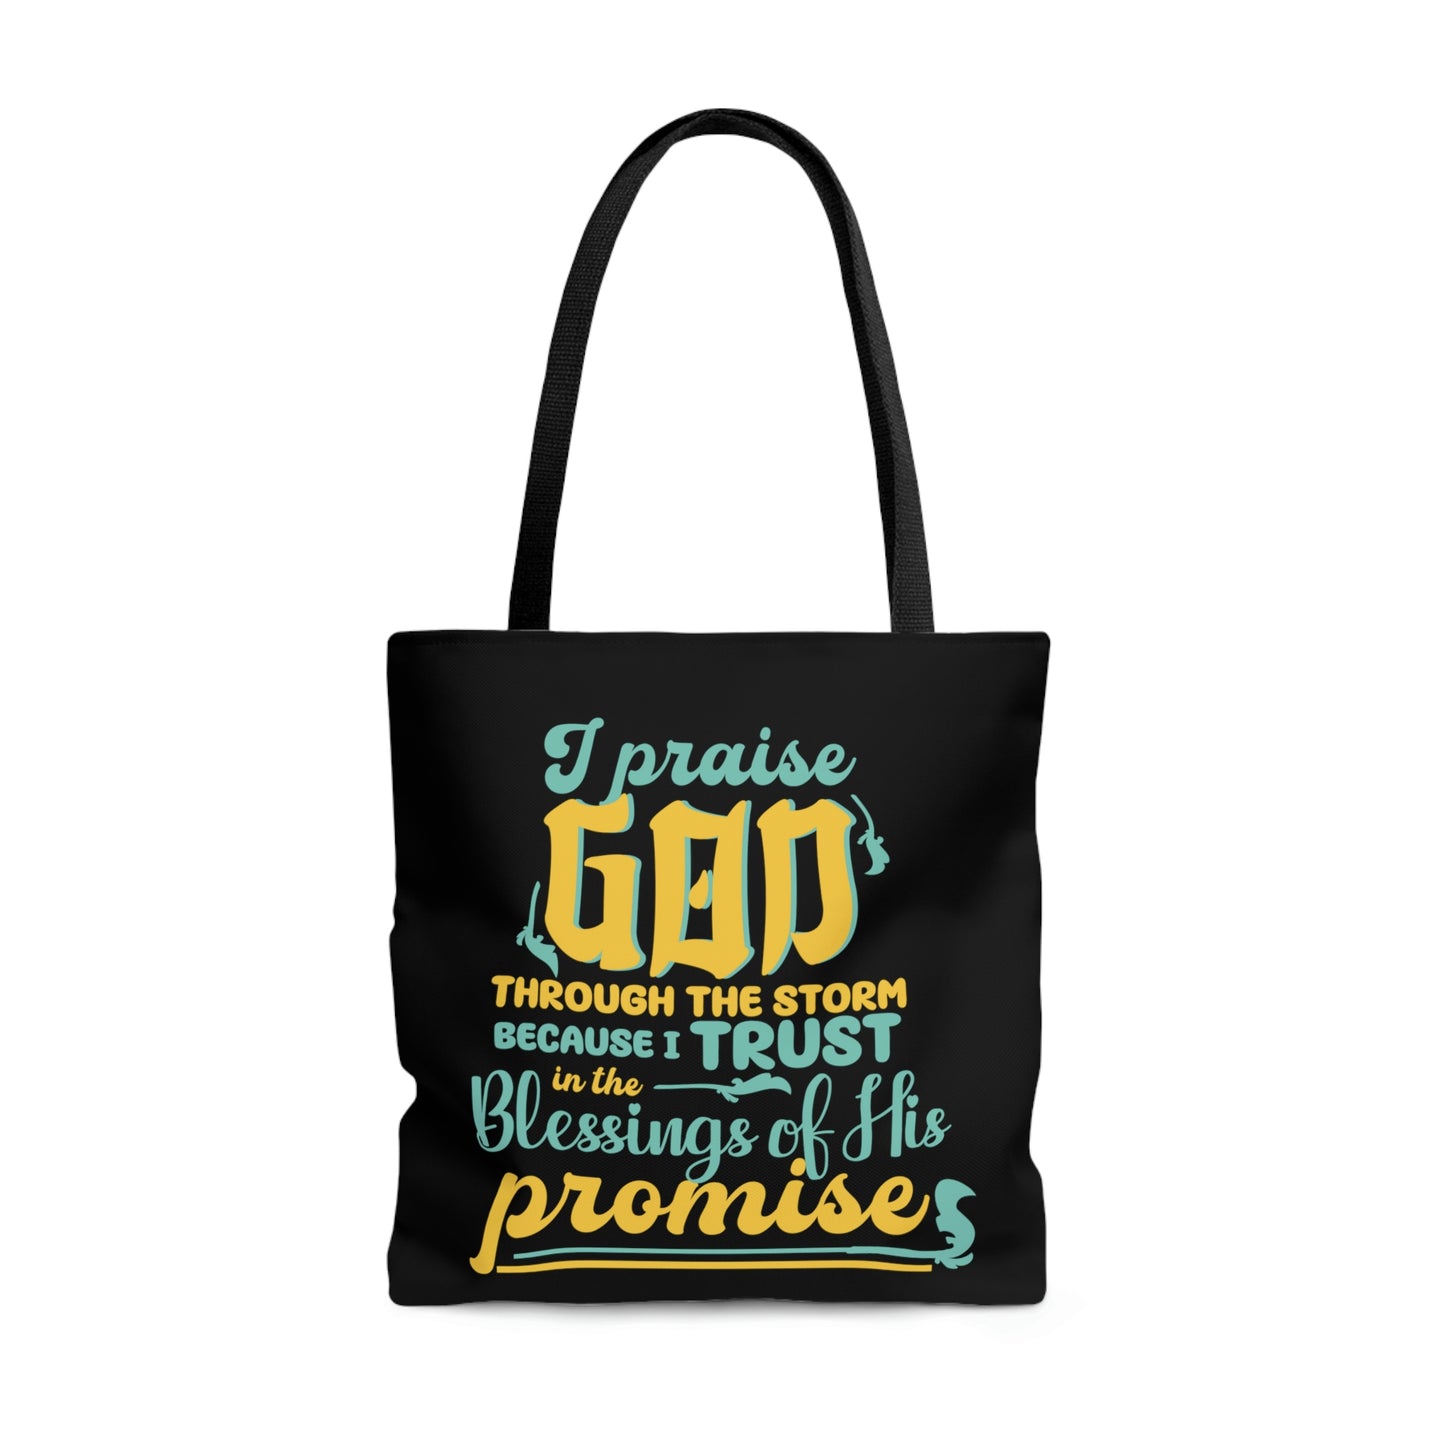 I Praise God Through The Storm Because I Trust In The Blessings Of His Promise Tote Bag